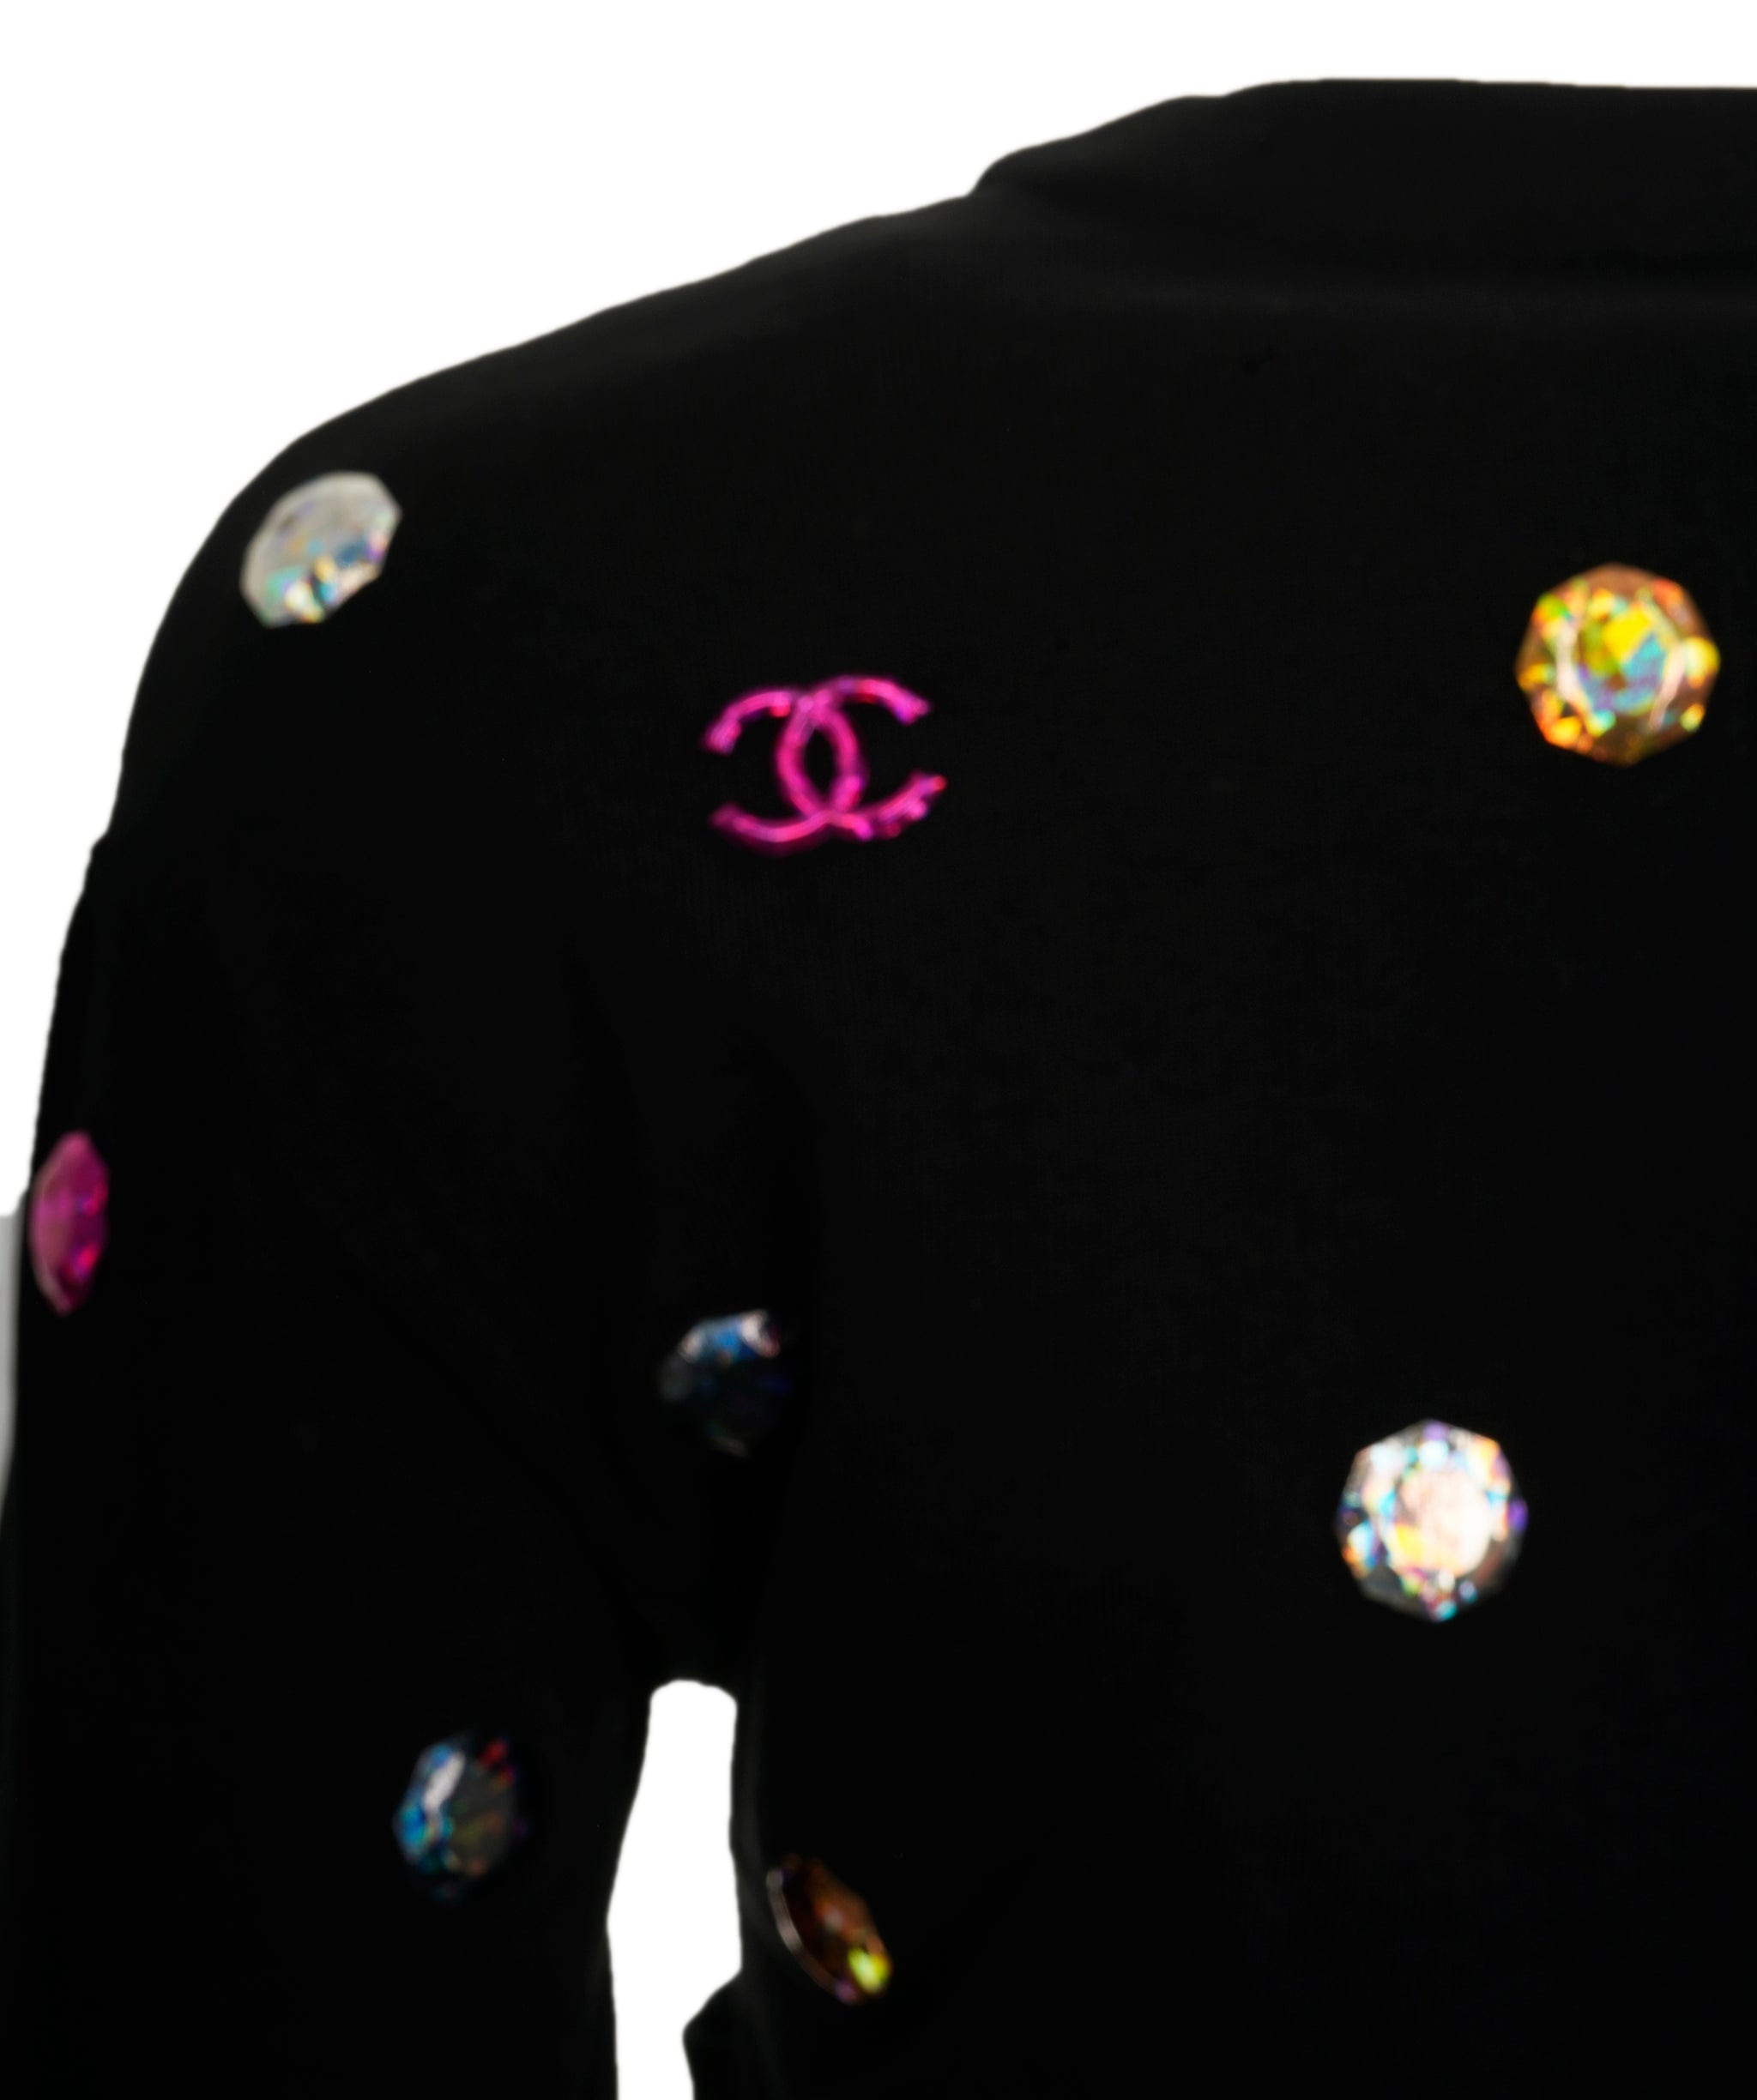 Chanel Cardigan Black with multicolored patch FR36 P71493K10289 AVC1849